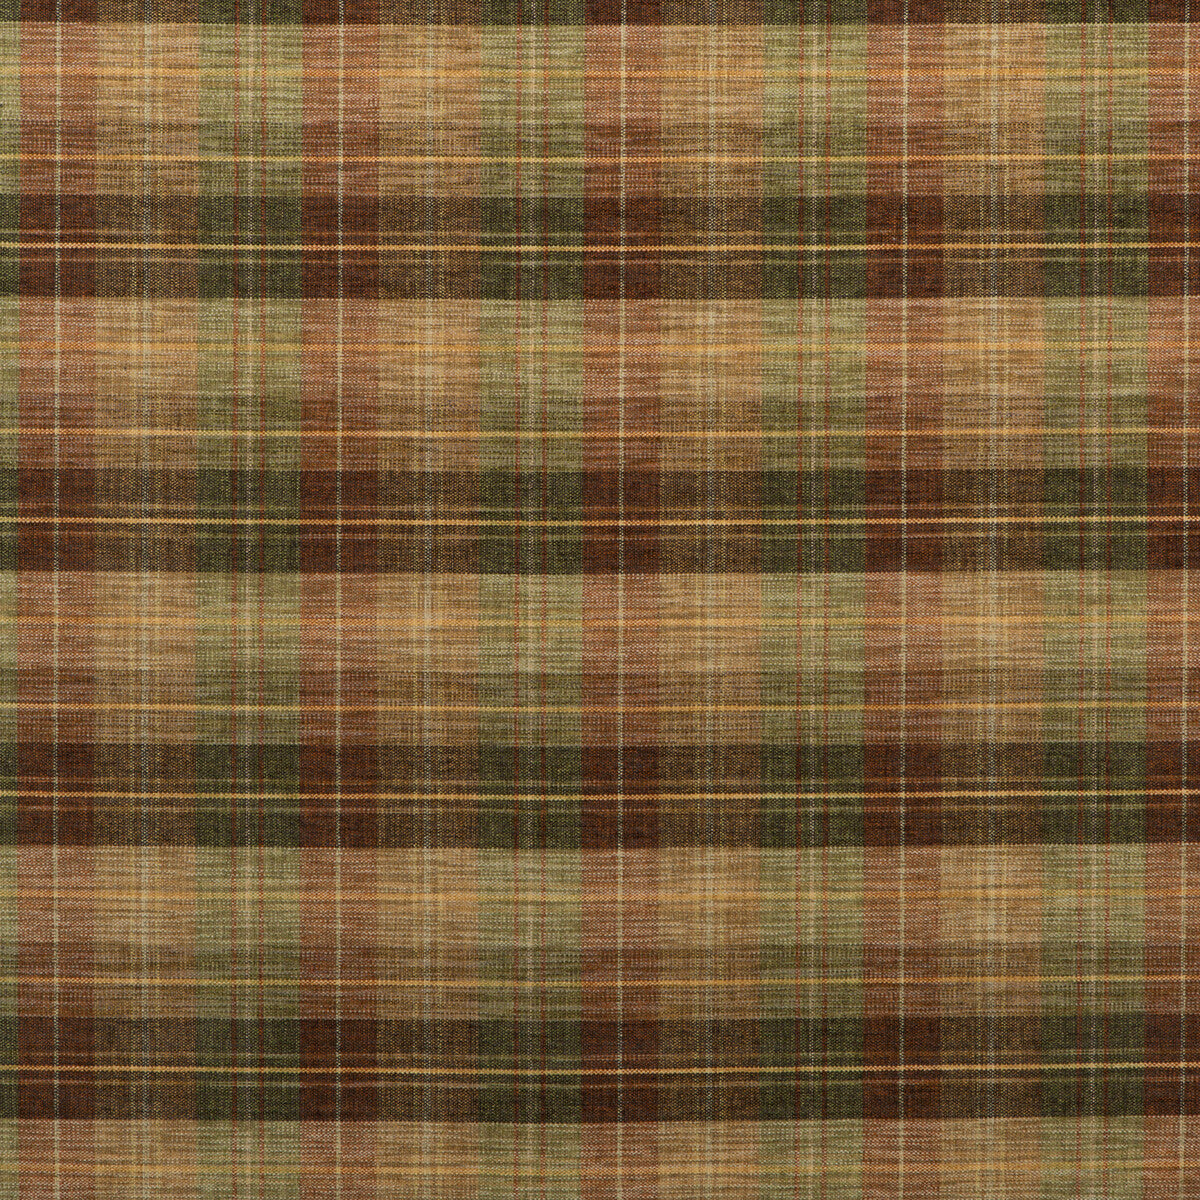 Clan Chenille fabric in burnt orange/green/nutmeg color - pattern FD598.P13.0 - by Mulberry in the Living Legends collection